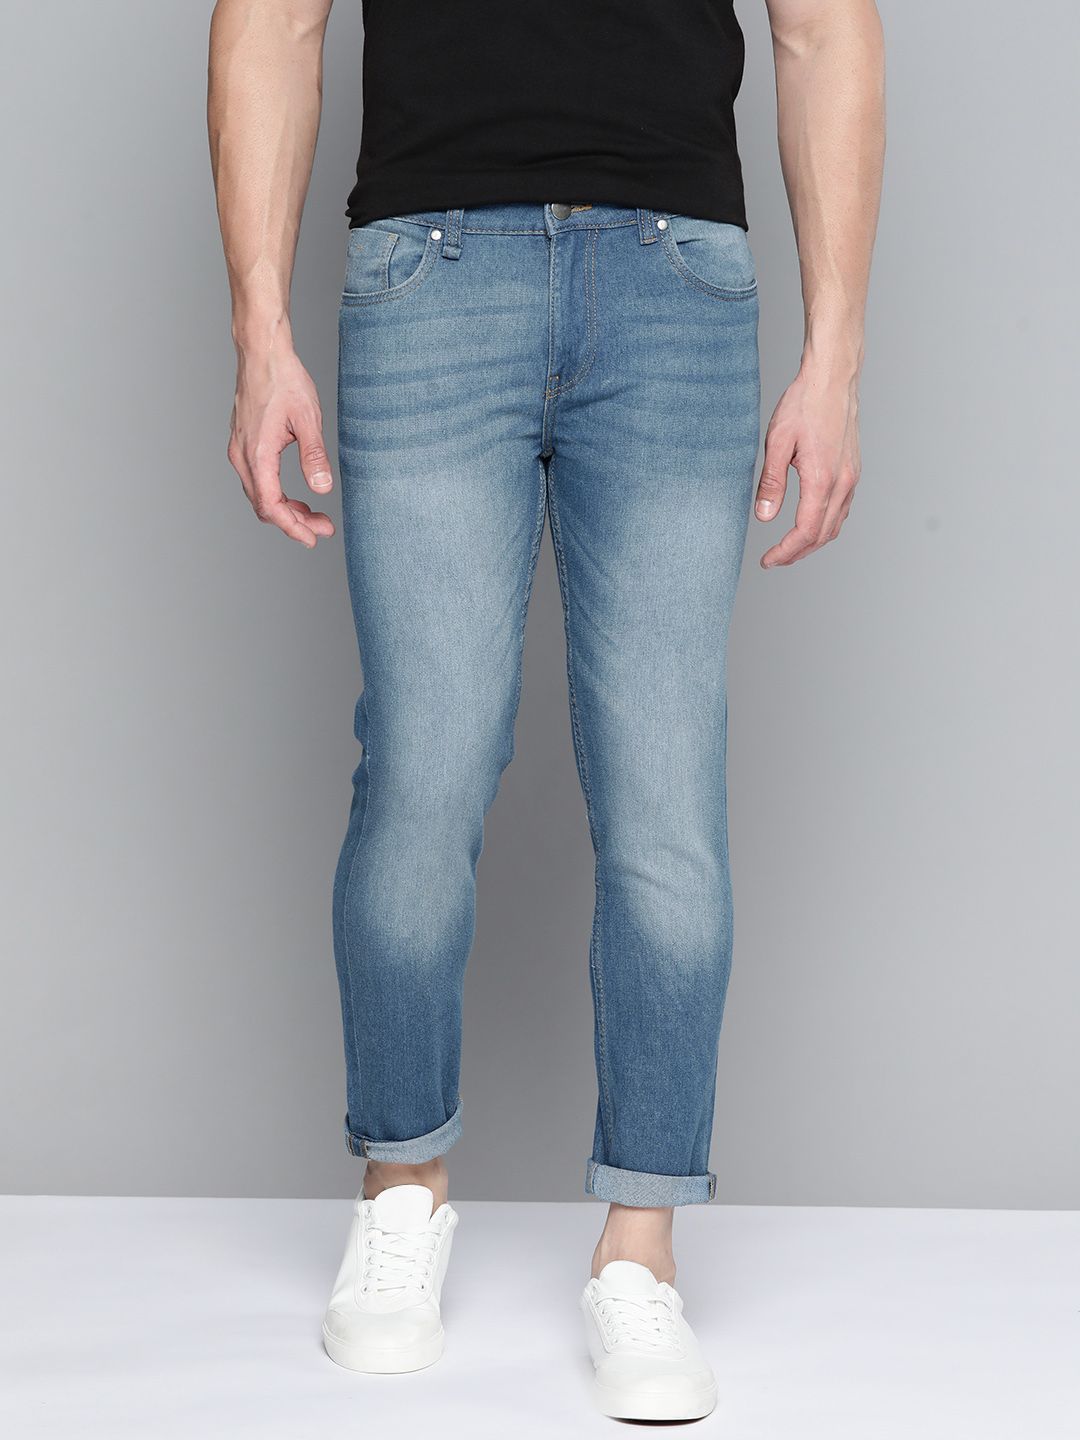 Men’s Jeans Starts from Rs. 449